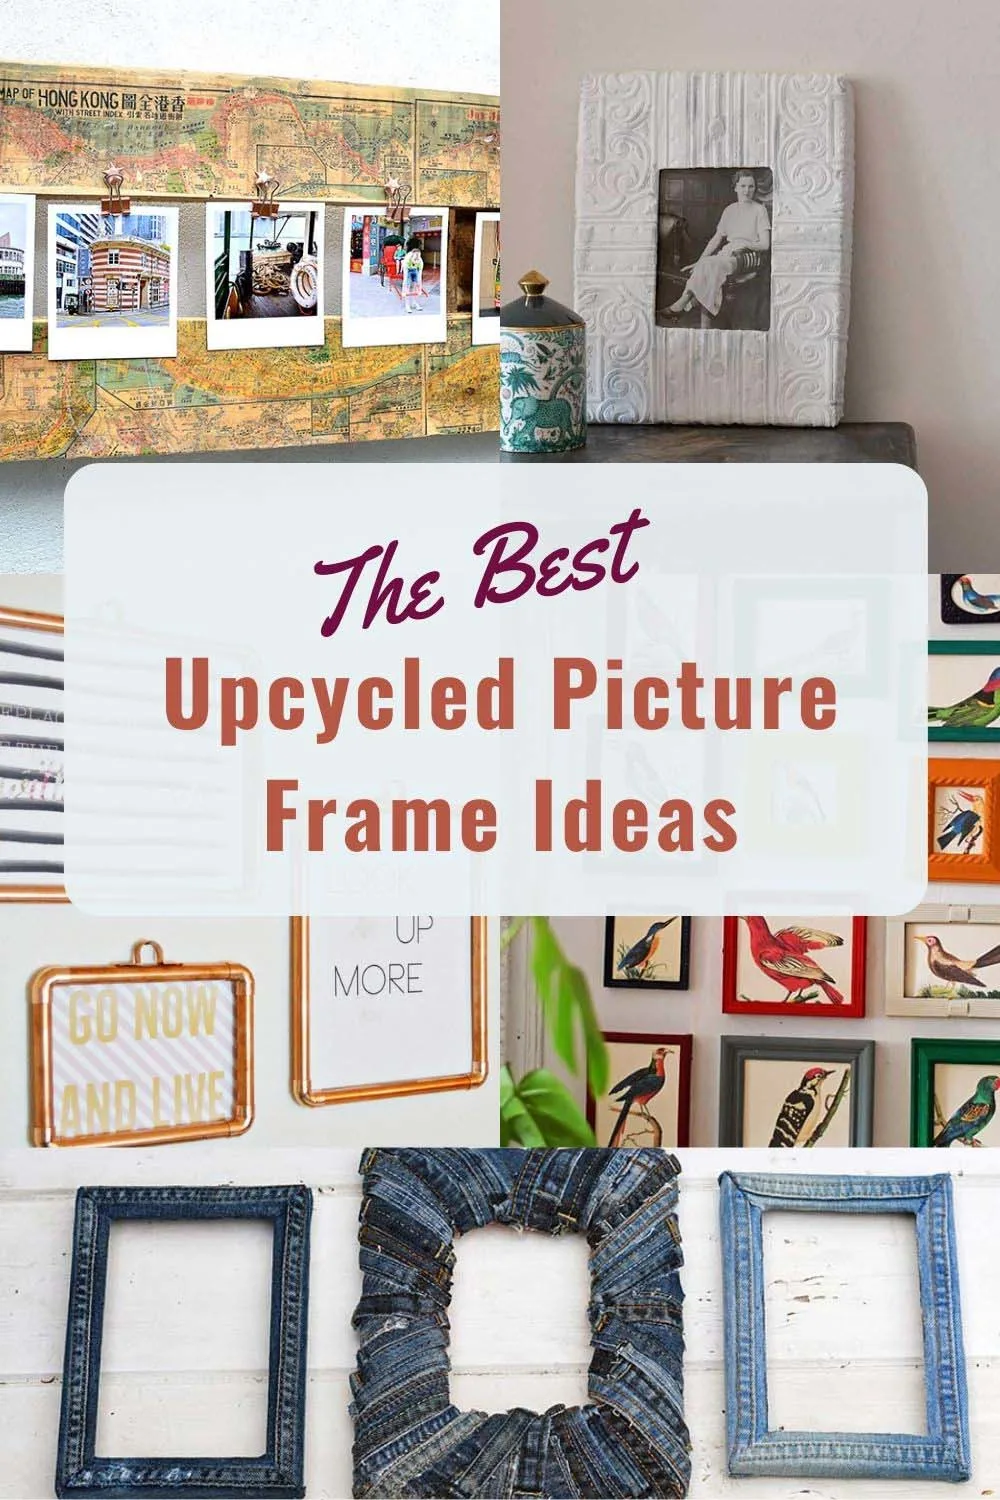 Photo Frame Ideas: Unique Things to Frame for Business